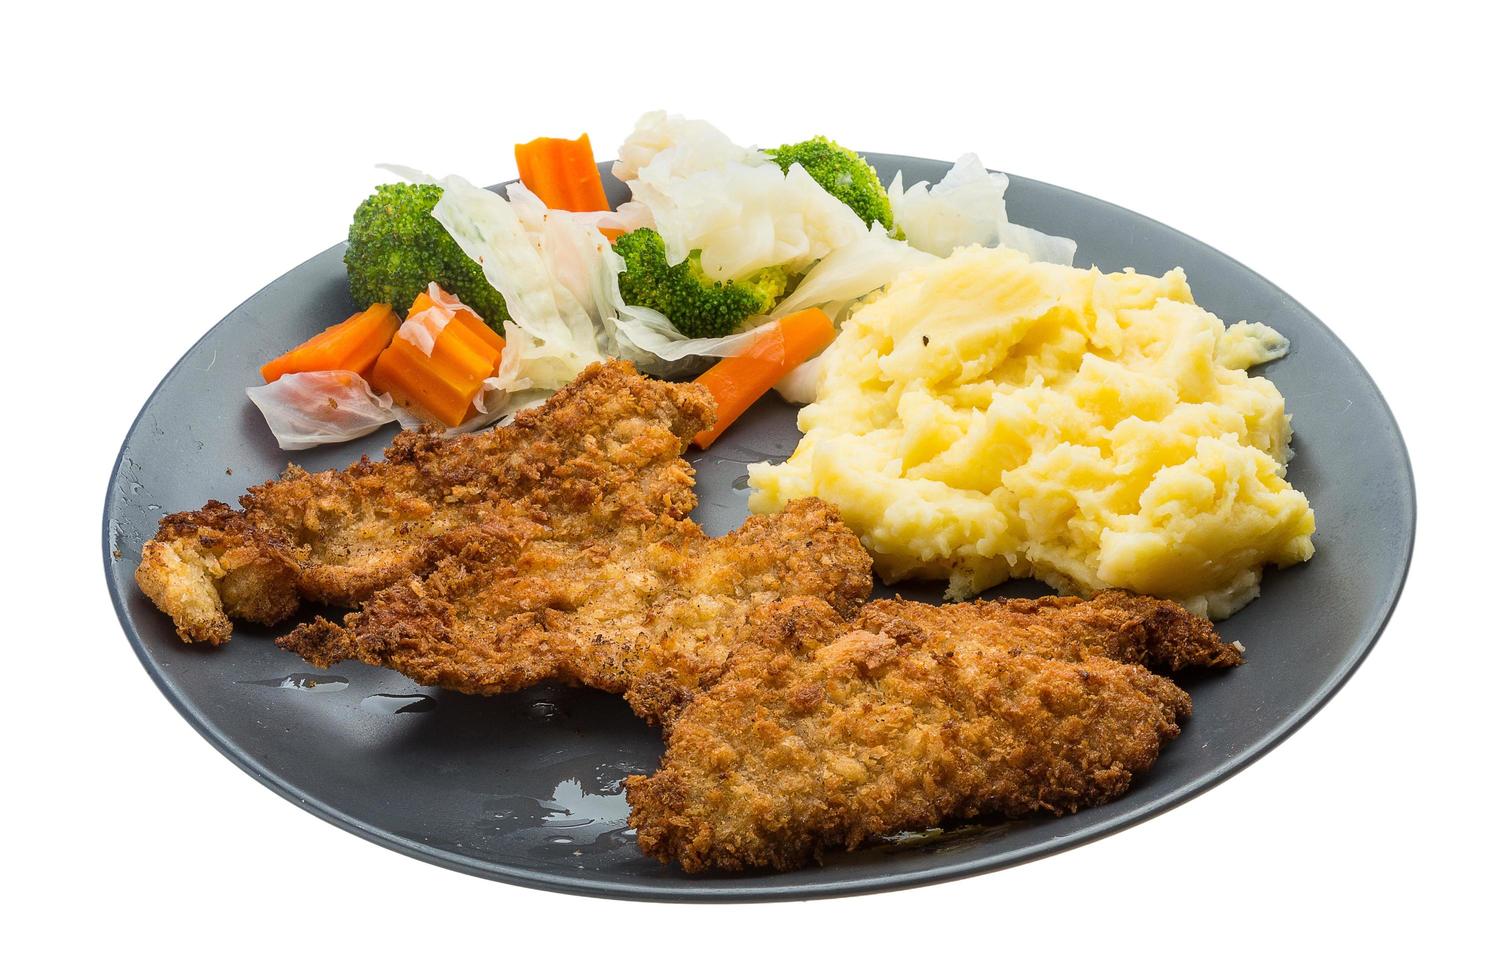 schnitzel on the plate and white background photo